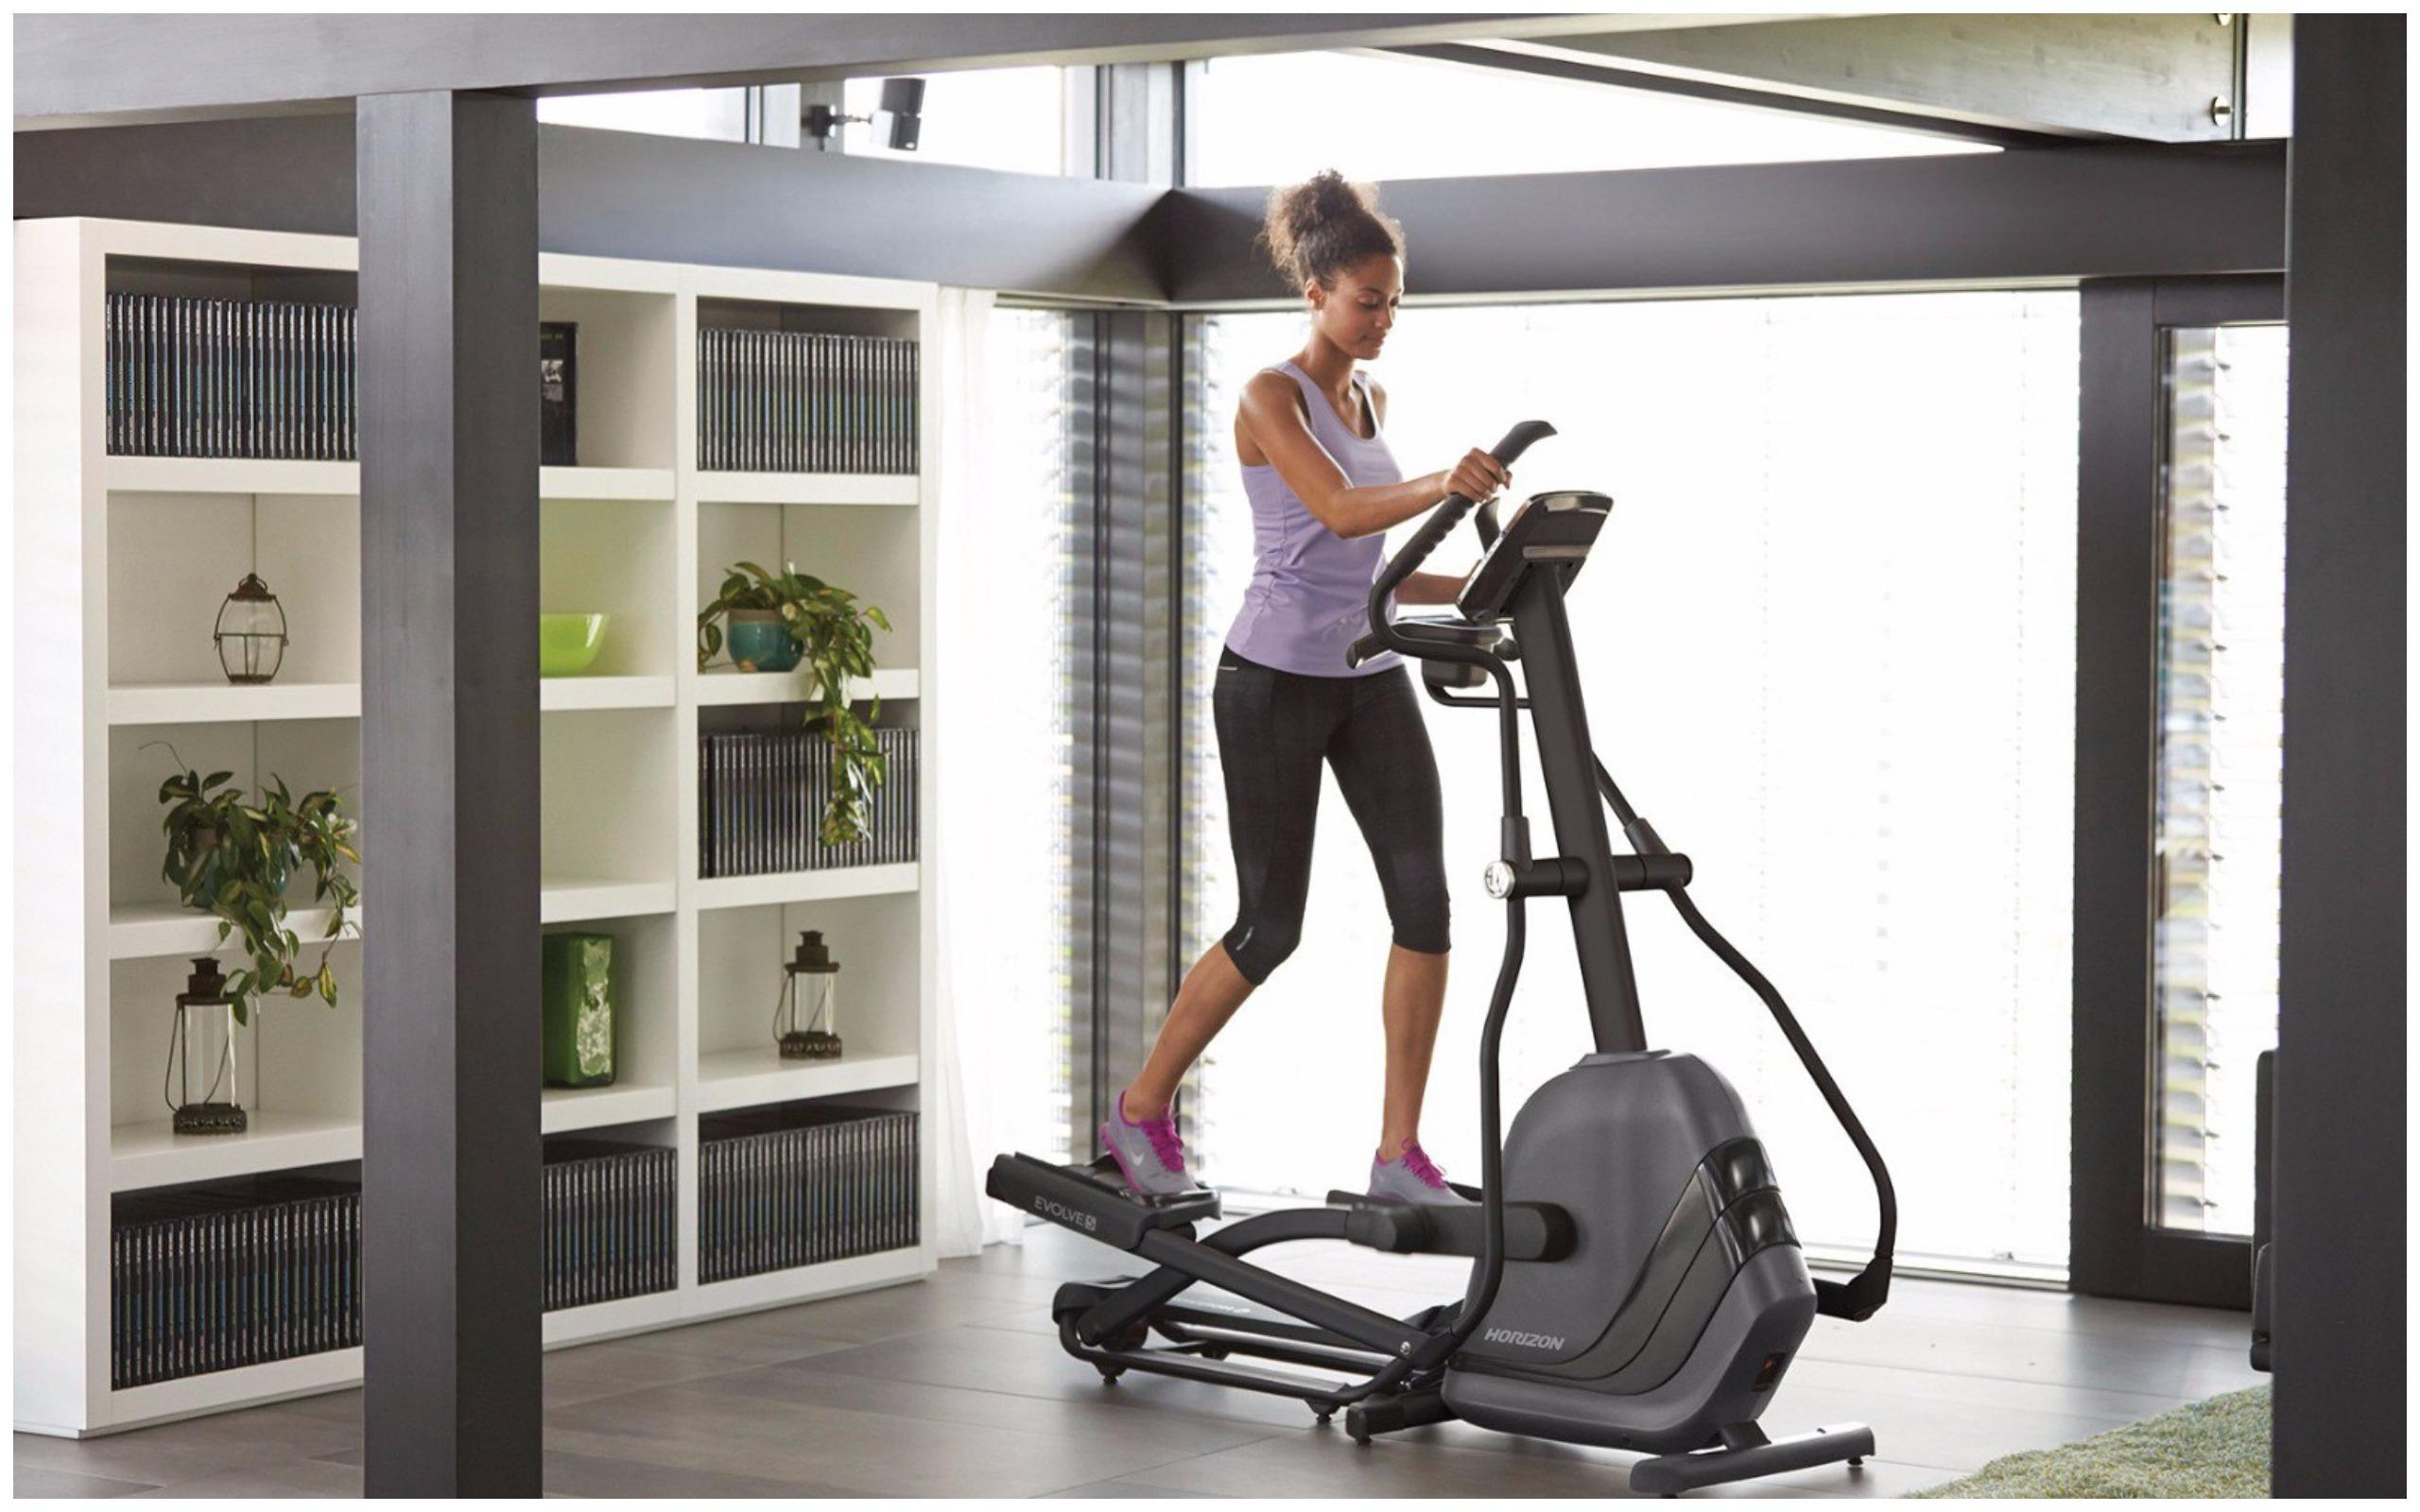 How To Use Life Fitness Equipment
